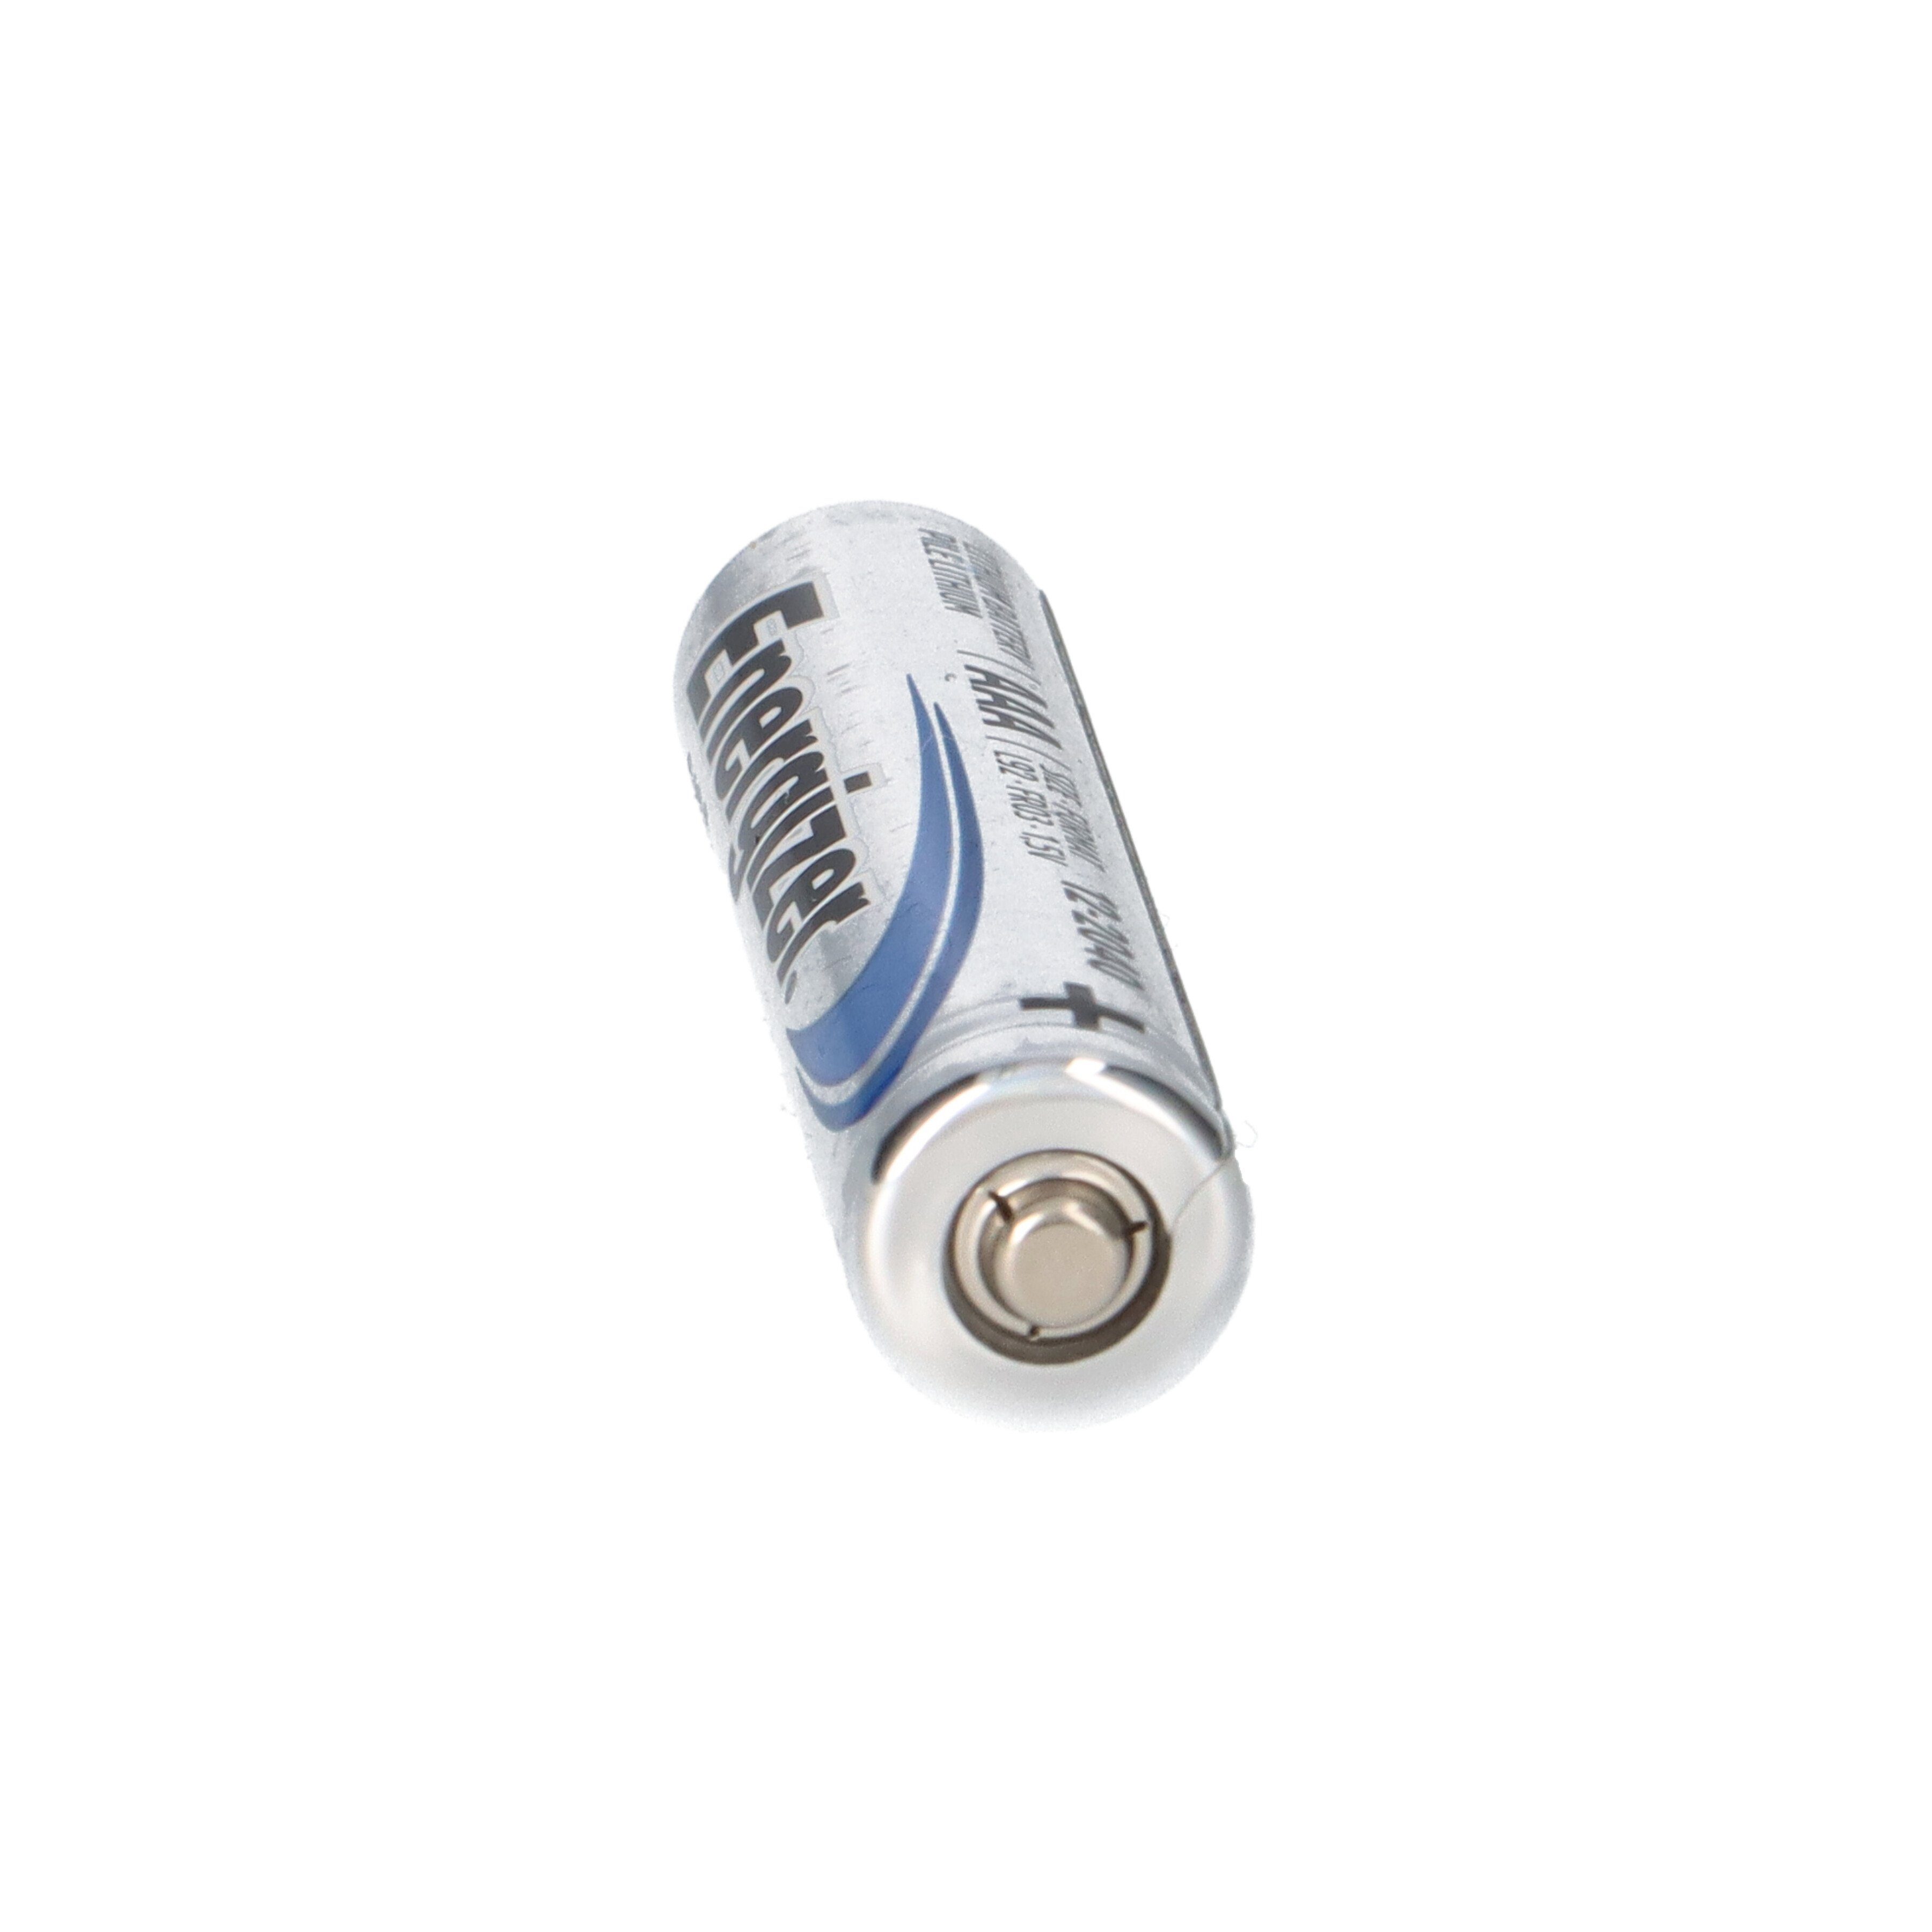 Energizer Energizer Batterie LR03 Batterie Lithium AAA L92 120x Ultimate Micro 1.5V